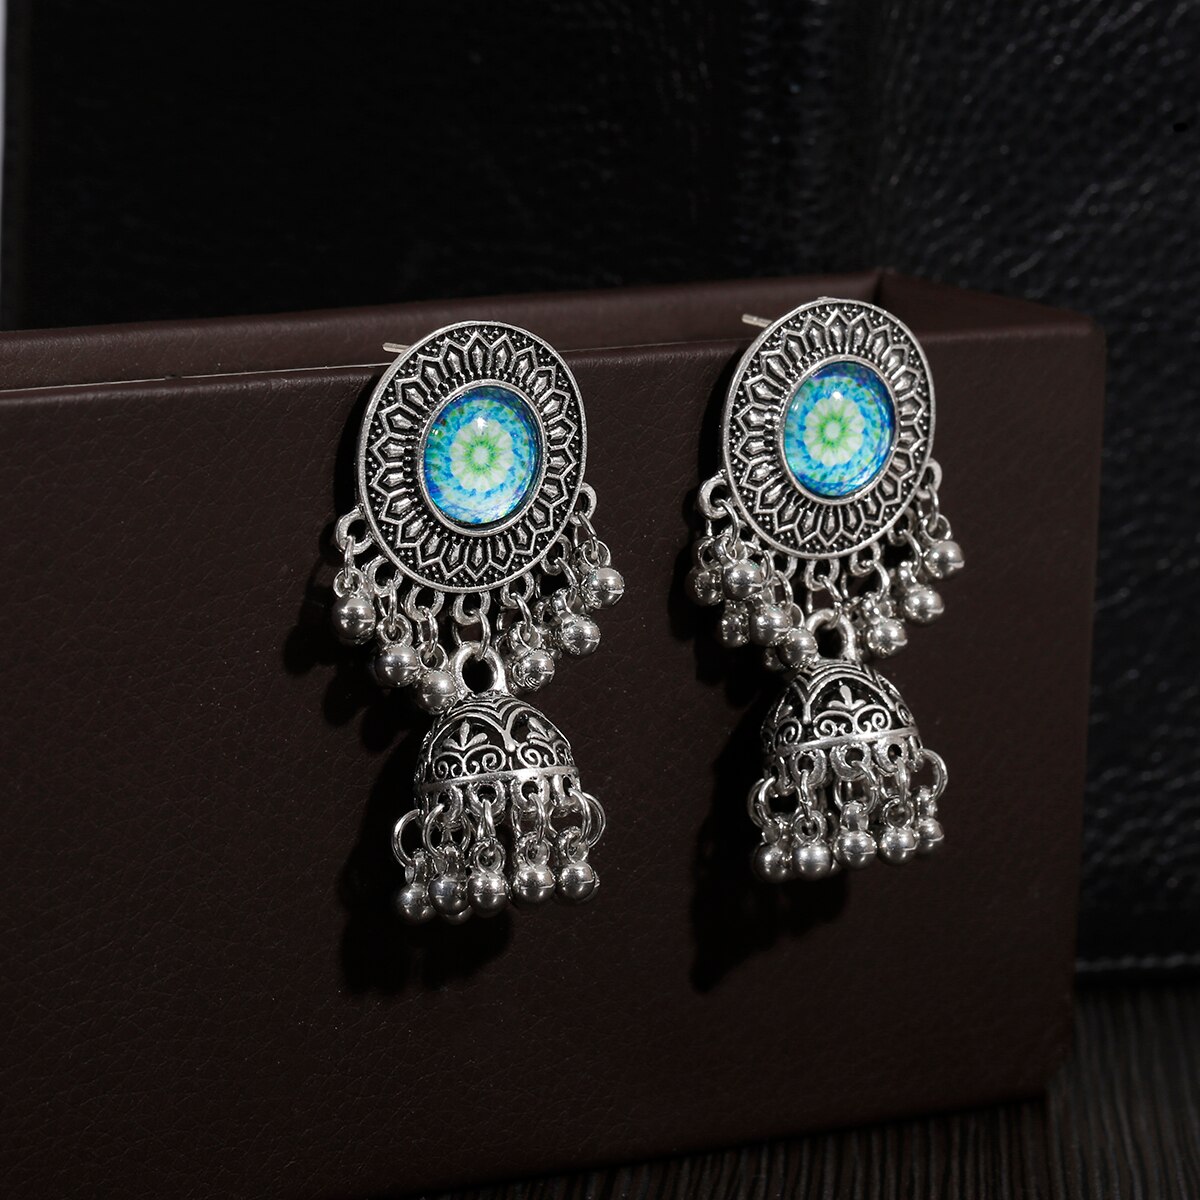 Classic-Vintage-Silver-Color-Alloy-Carved-Bollywood-Oxidized-Earrings-For-Women-Ethnic-Rose-Red-Jhum-1005003651700580-2